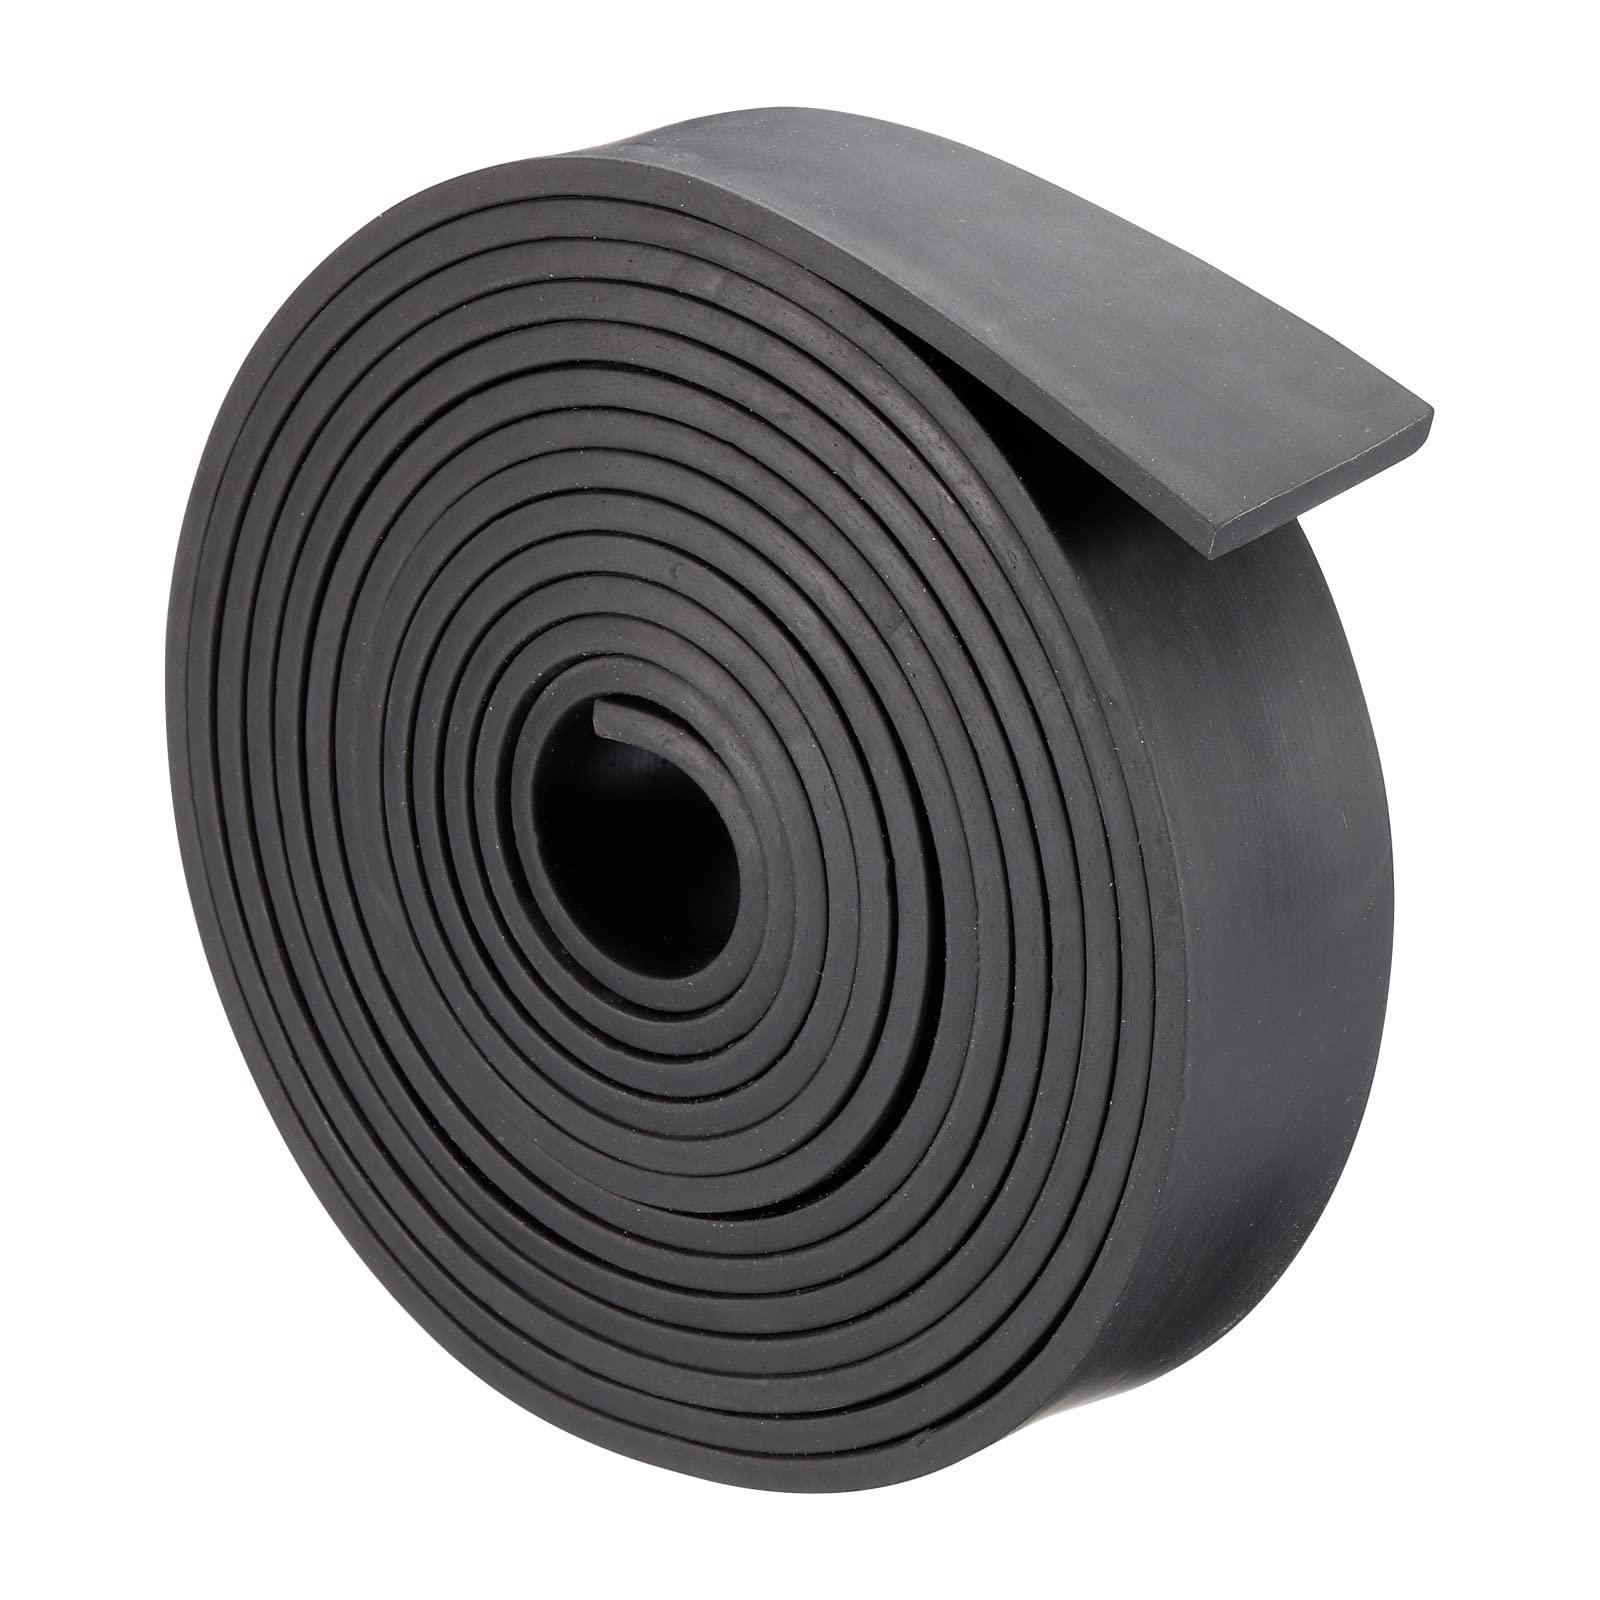 sourcing map Neoprene Rubber Sheet Rolls 5mm(T) x40mm(W) x4m(L), Solid Rubber Strips for DIY Gasket, Sealing Padding, Reduce Vibration Mat